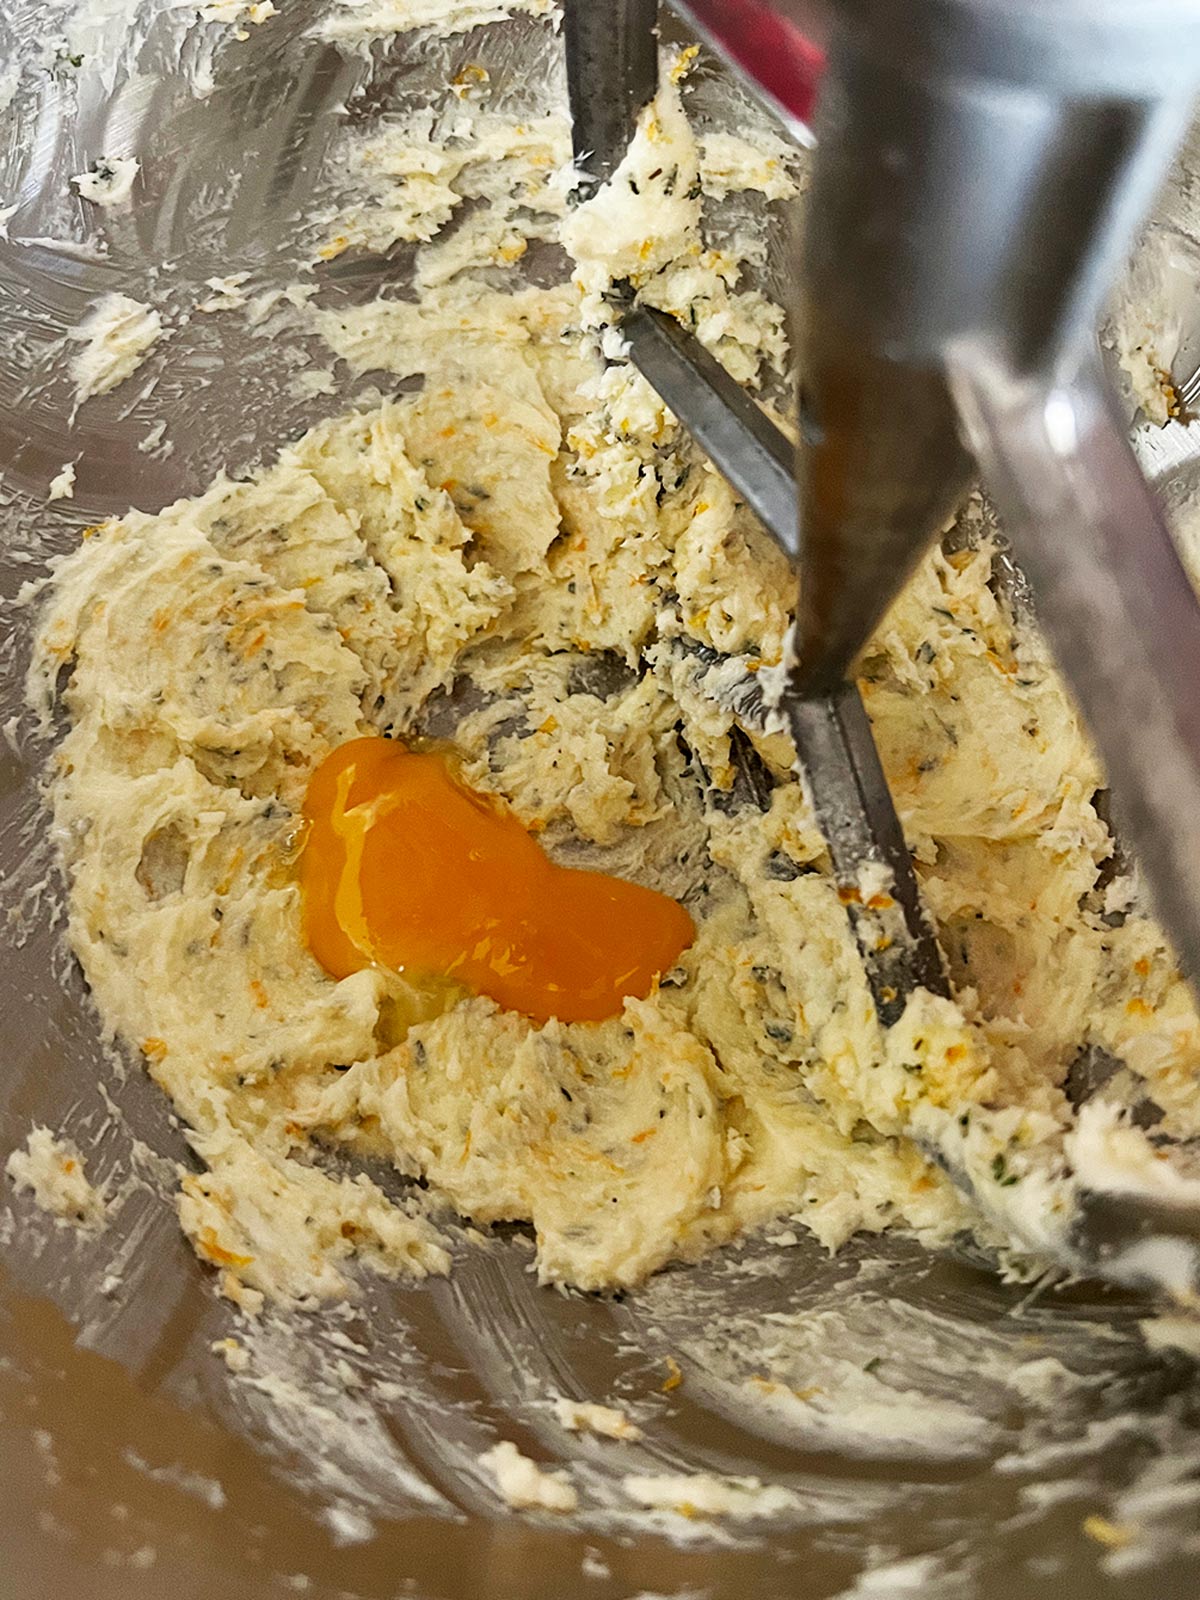 Adding egg yolk to creamed butter sugar mixture in mixing bowl.